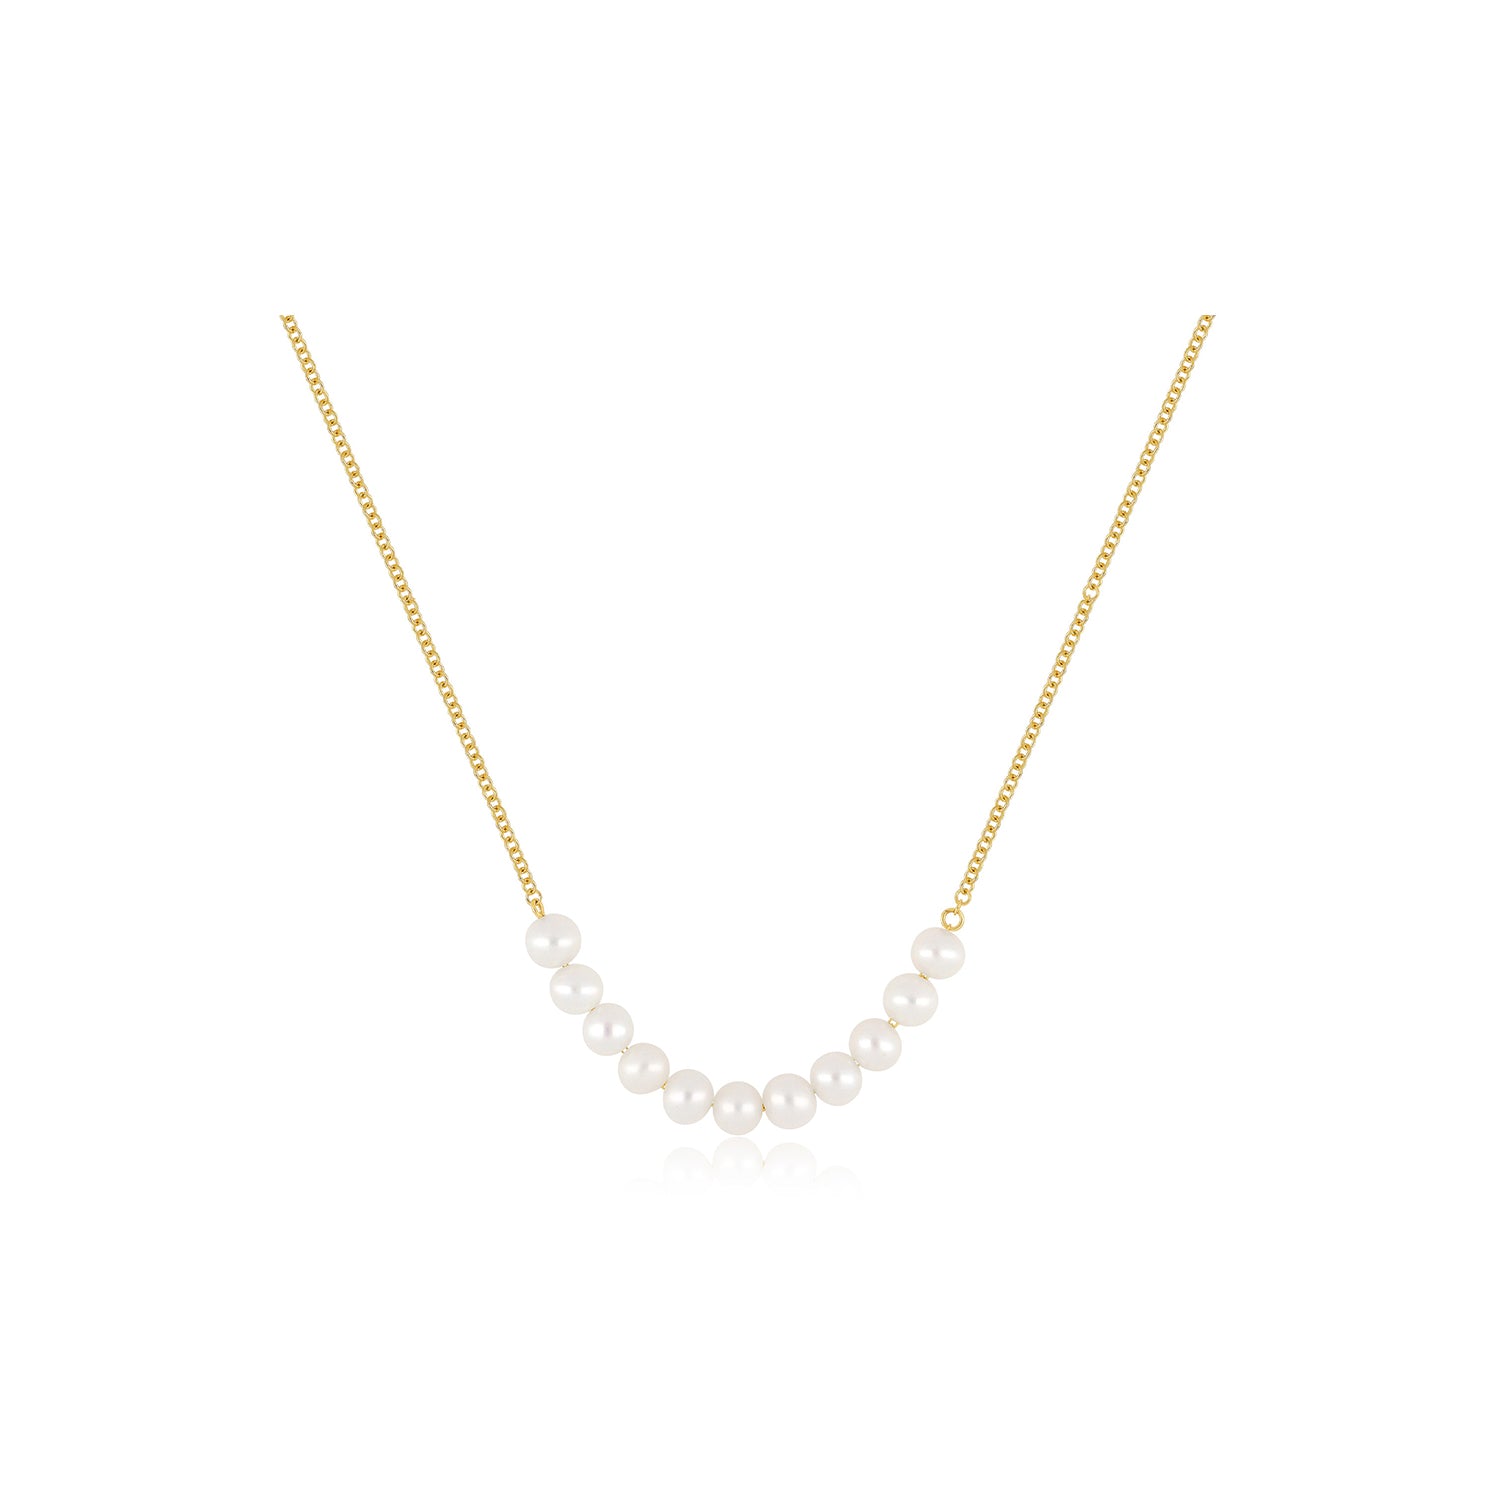 Pearl Necklace in 14k yellow gold